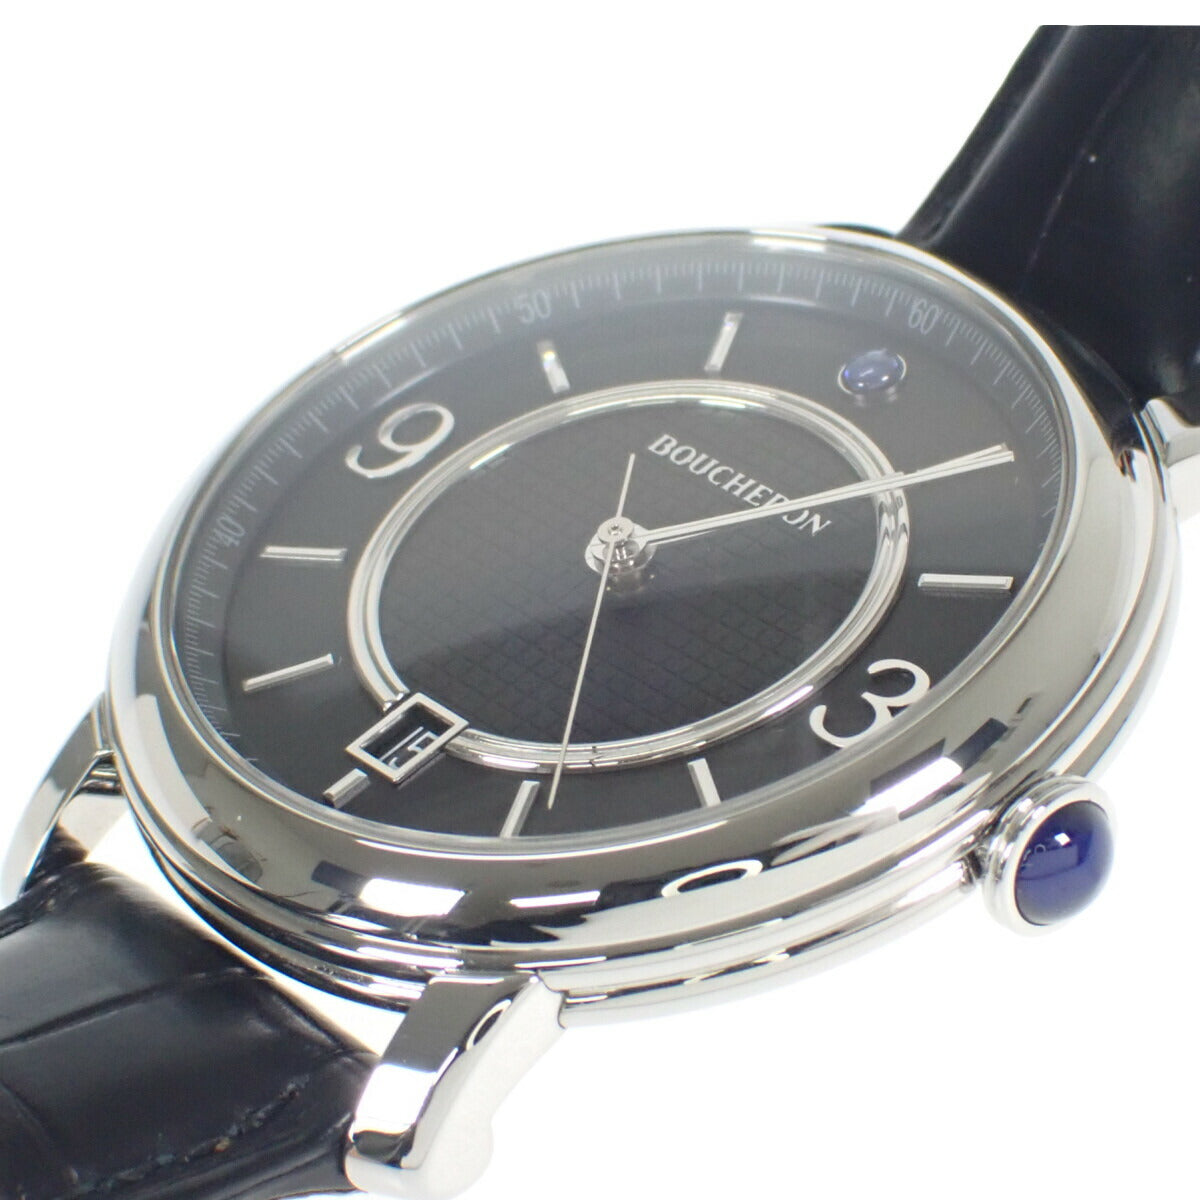 Boucheron  Boucheron Epure Stainless Steel Men’s Watch with Black Leather Strap and Black Dial WA021202 in Excellent condition